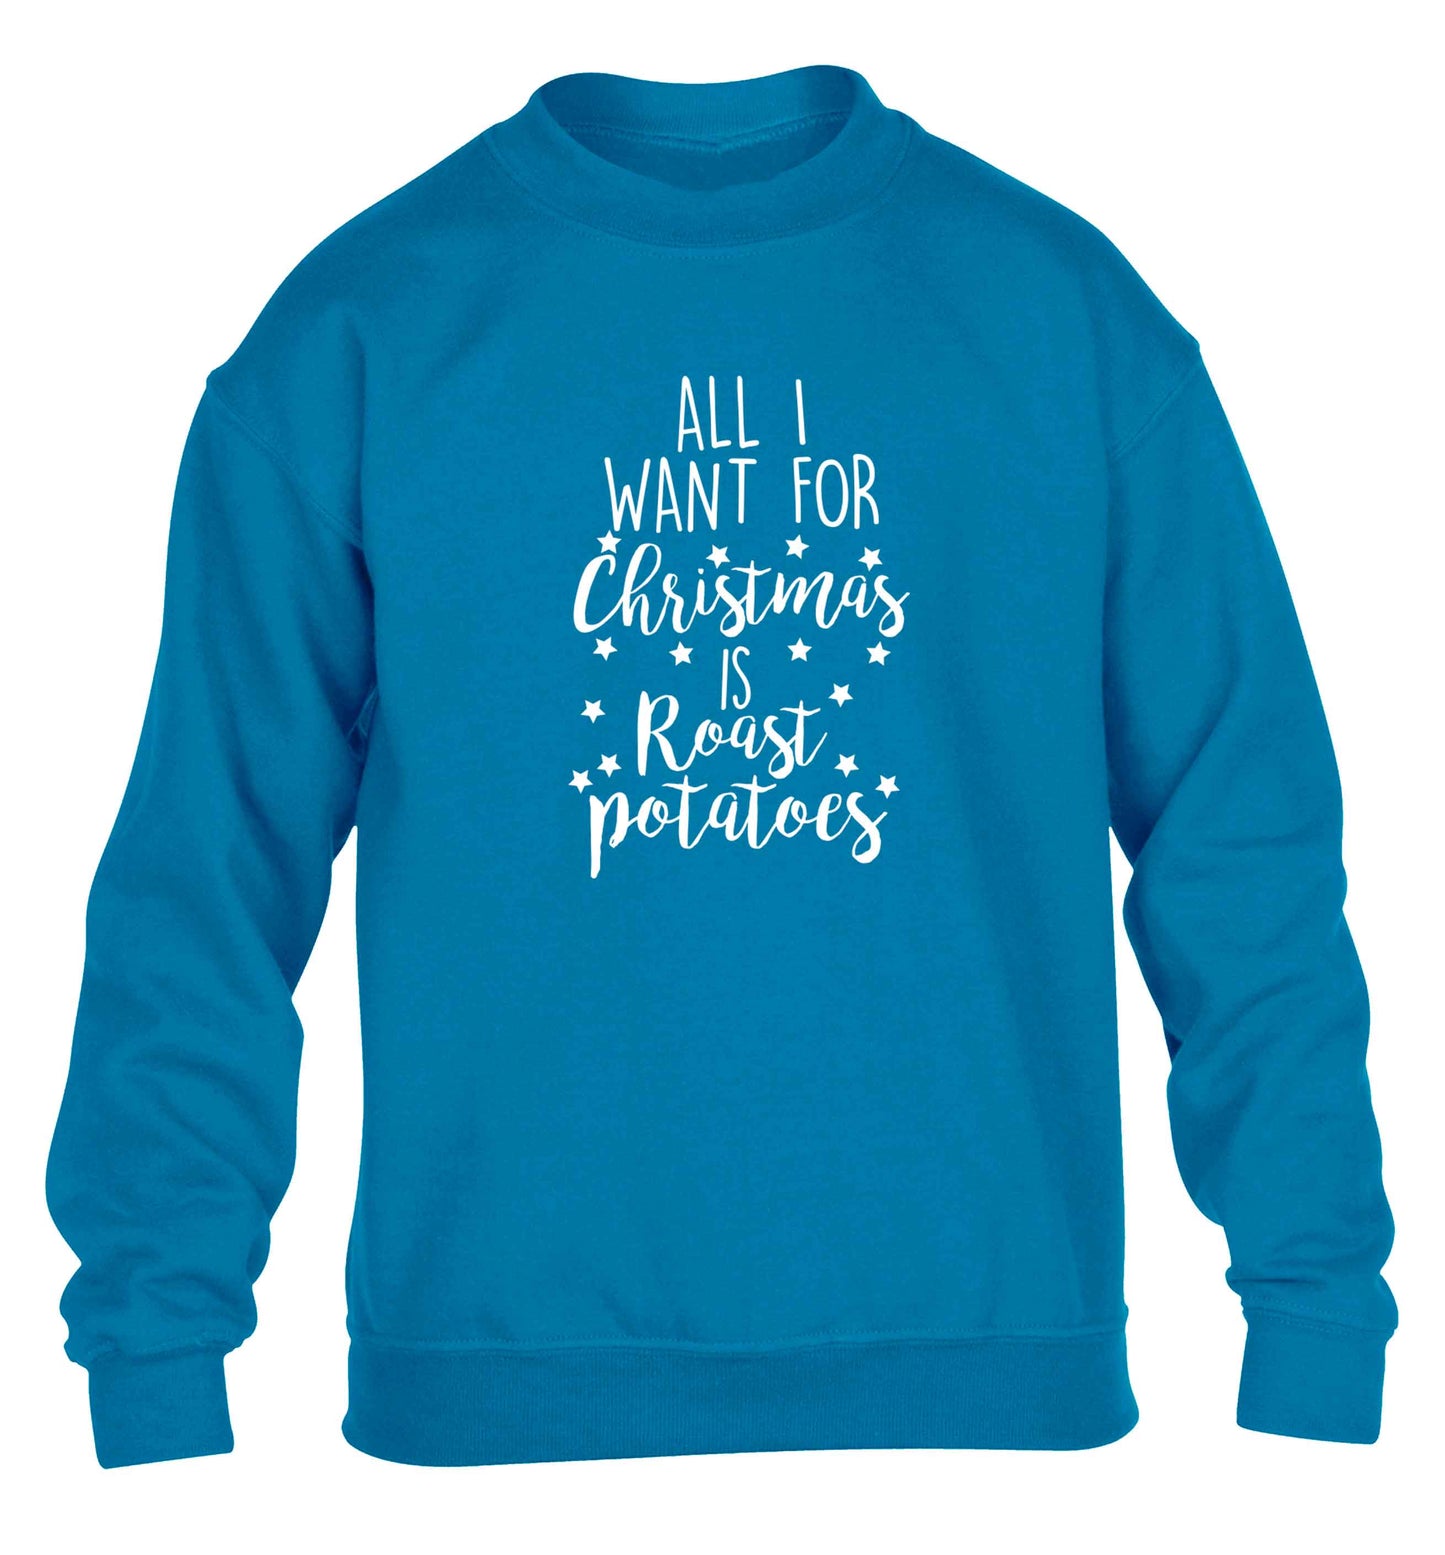 All I want for Christmas is roast potatoes children's blue sweater 12-13 Years